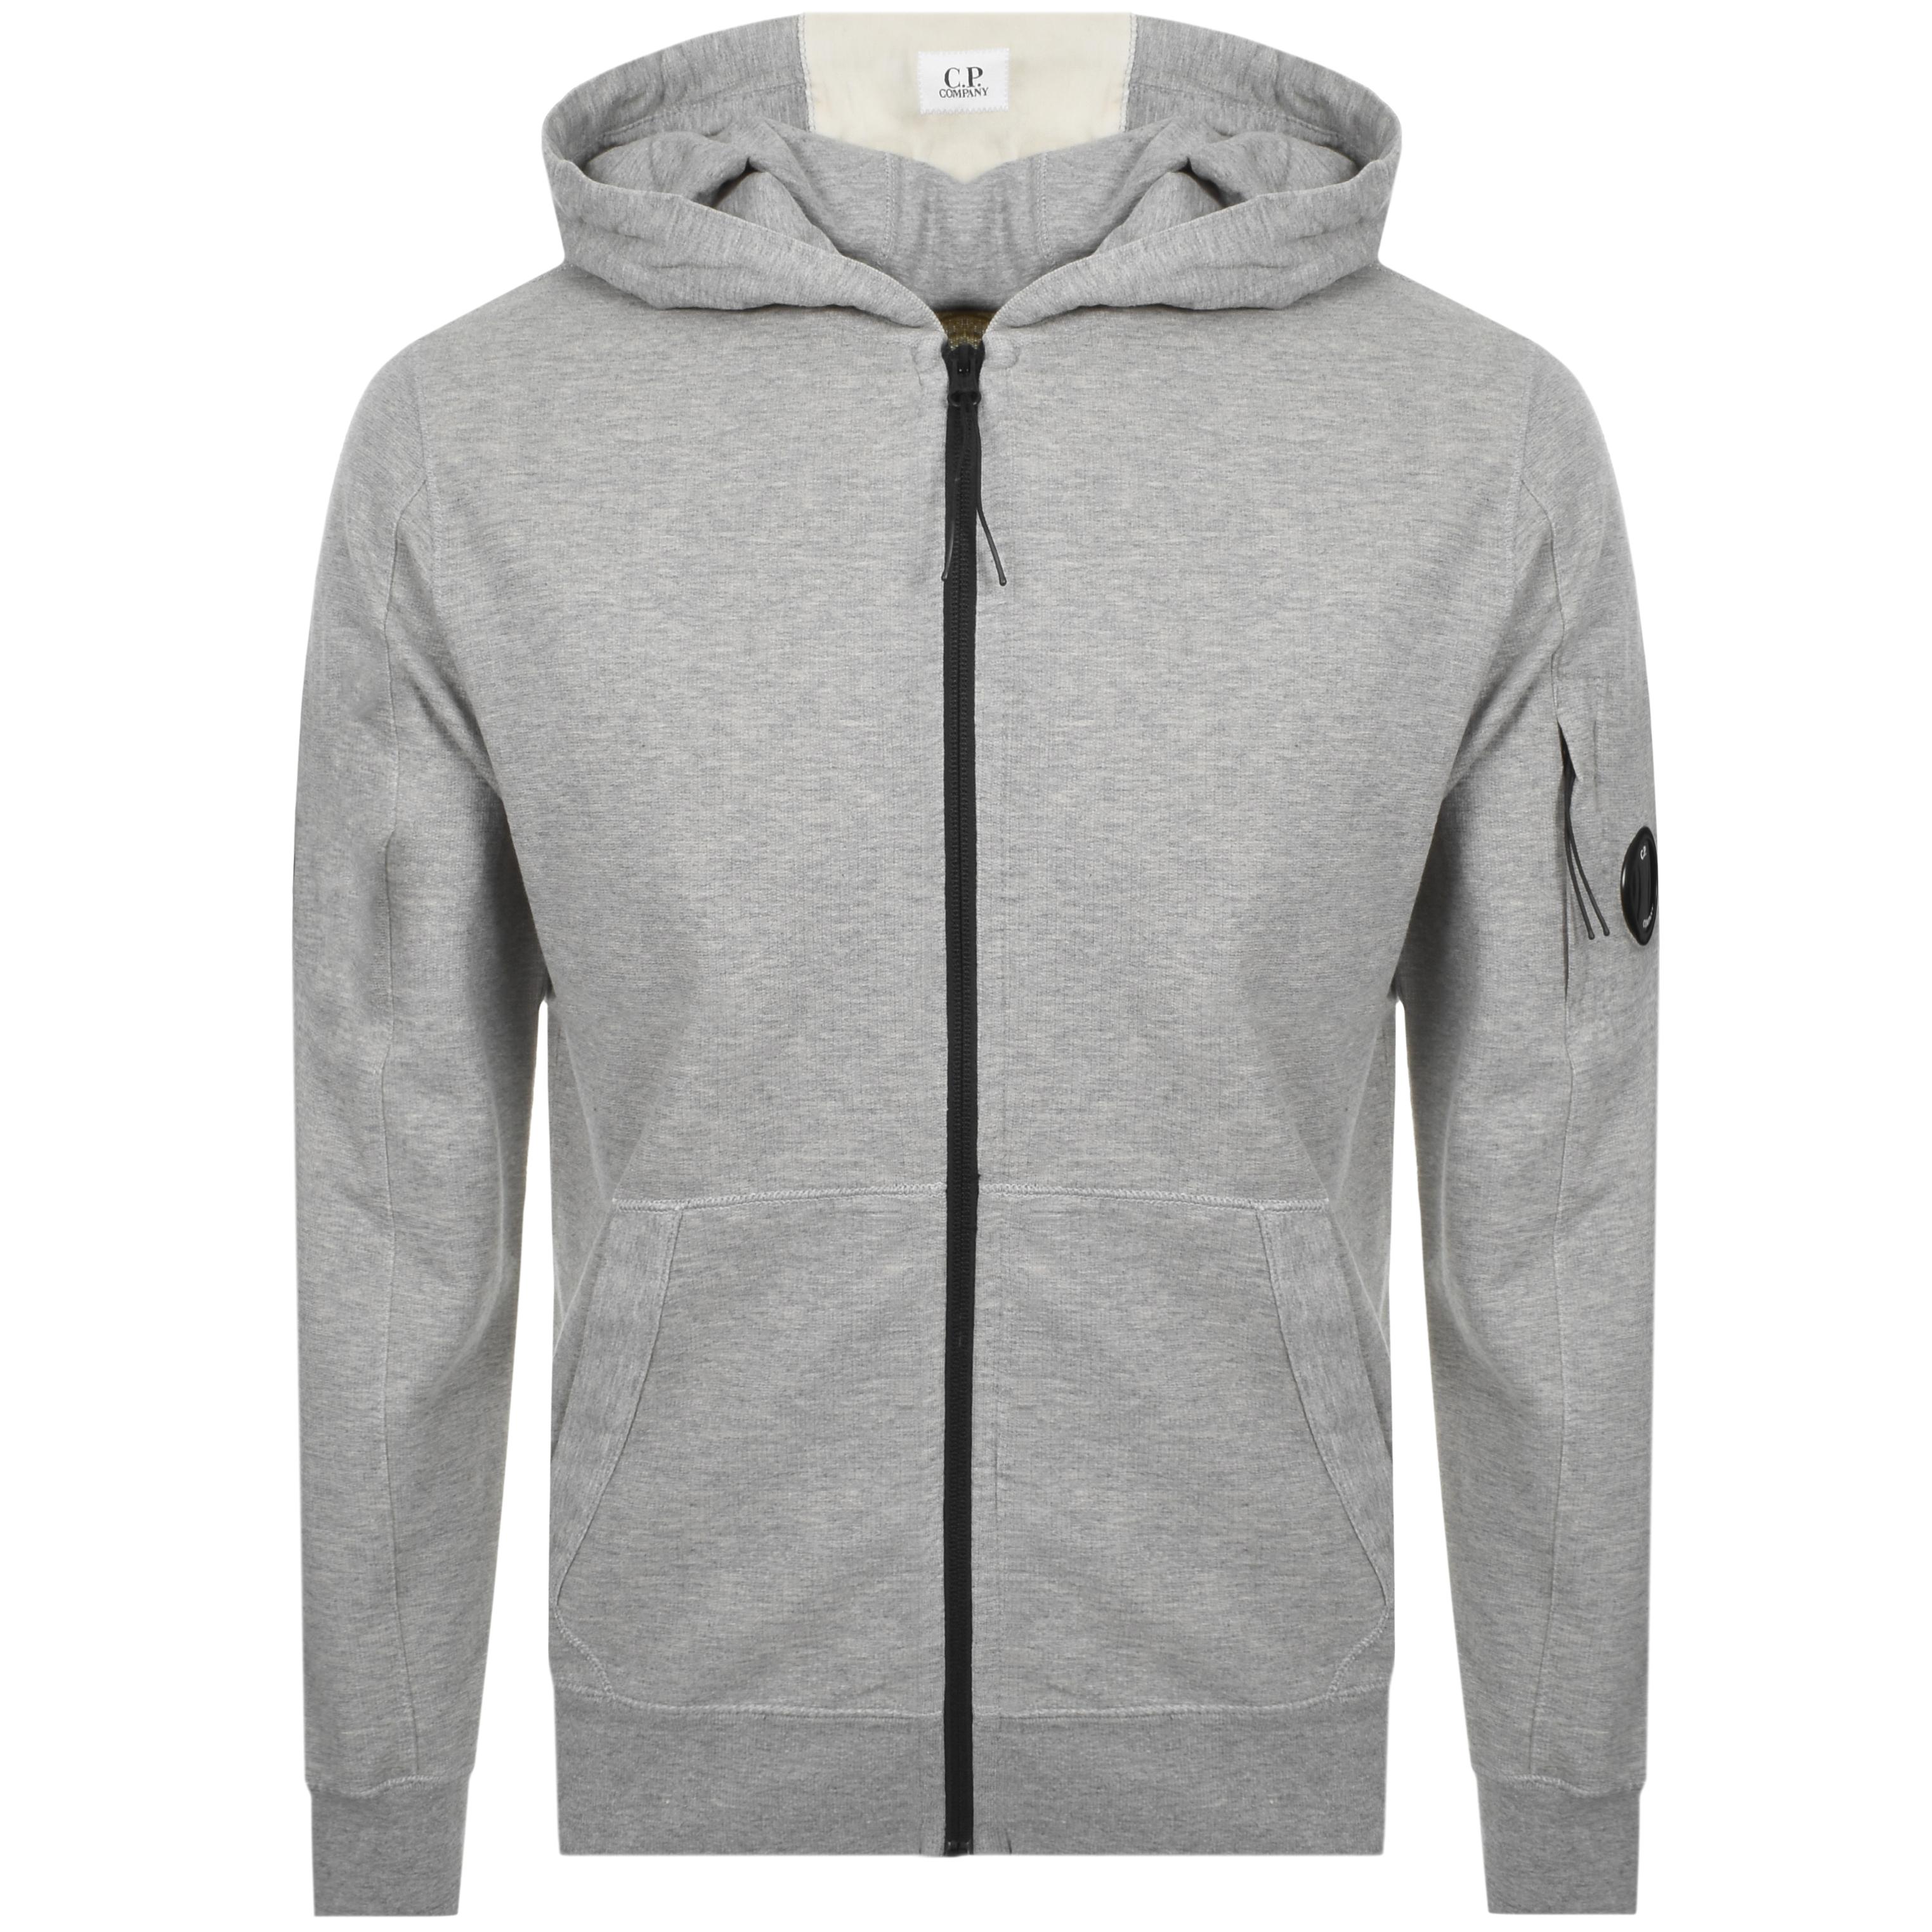 C P Company Cp Company Full Zip Goggle Hoodie Grey in Gray for Men - Lyst